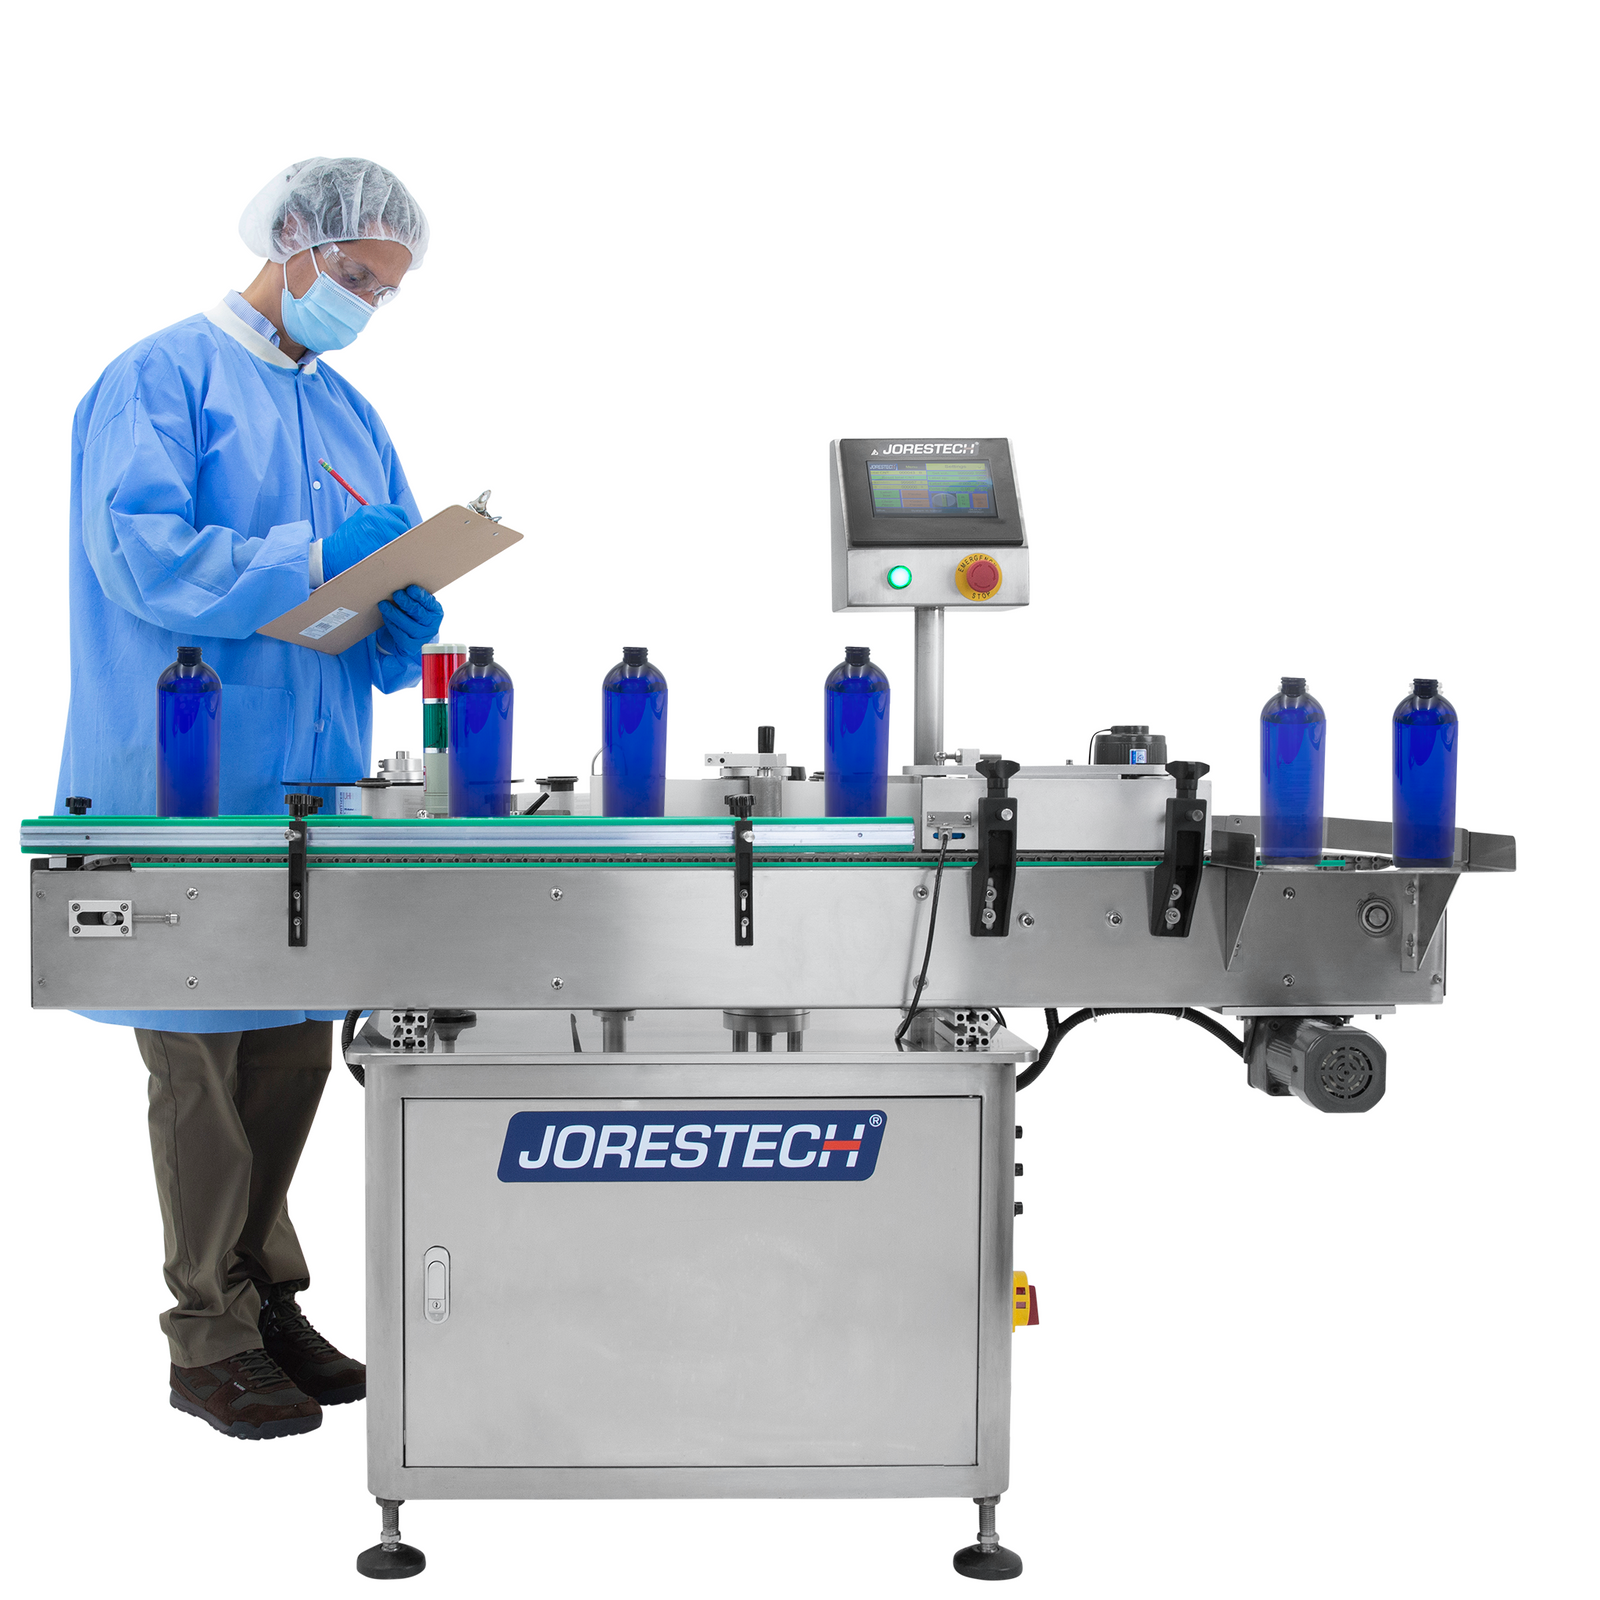 Worker checking a production line using an automatic label applicator to place product labels on blue round containers.